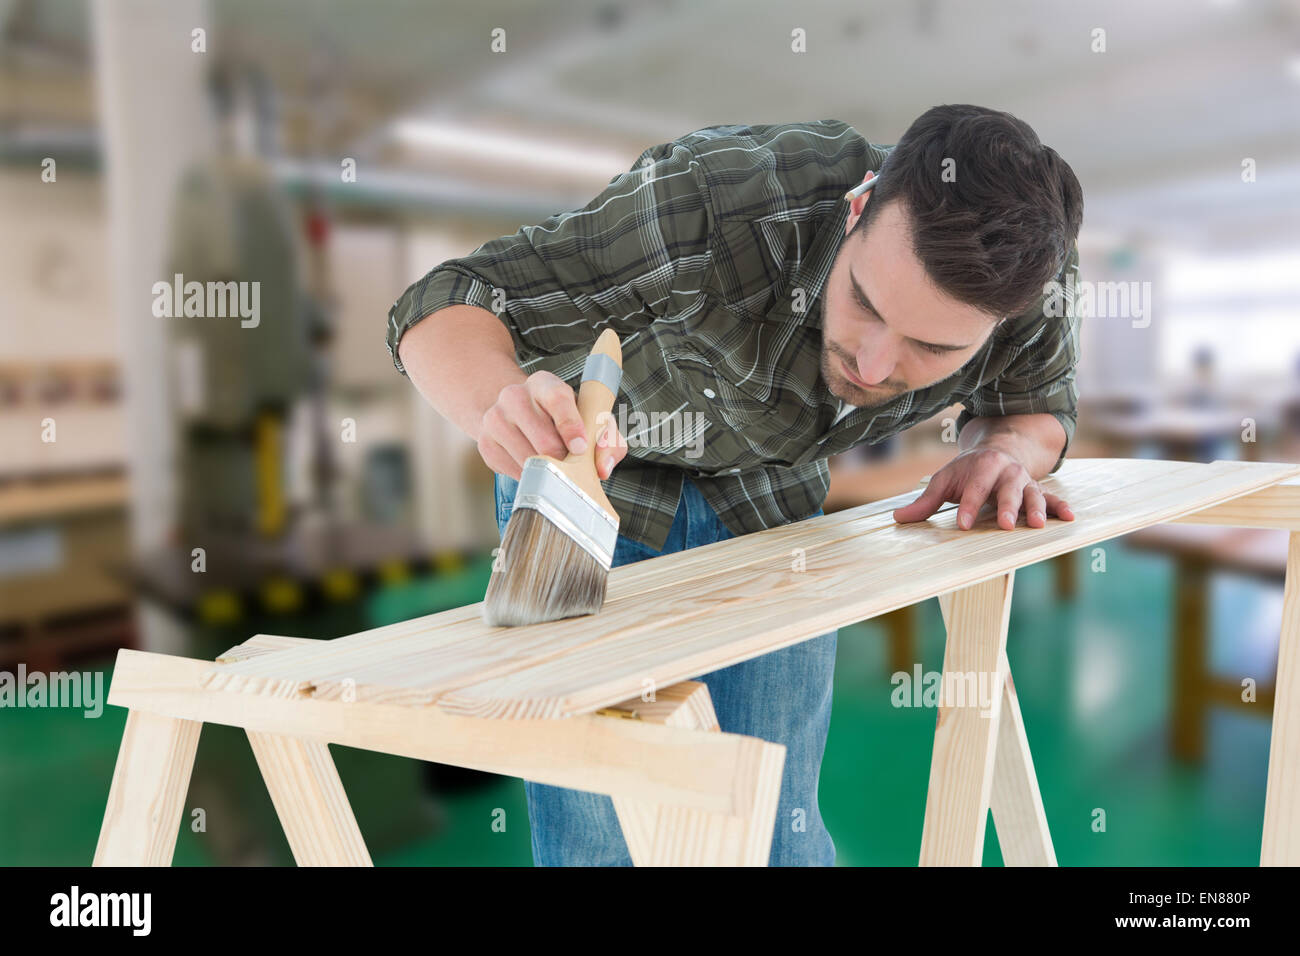 Composite image of worker using brush on wooden plank Stock Photo